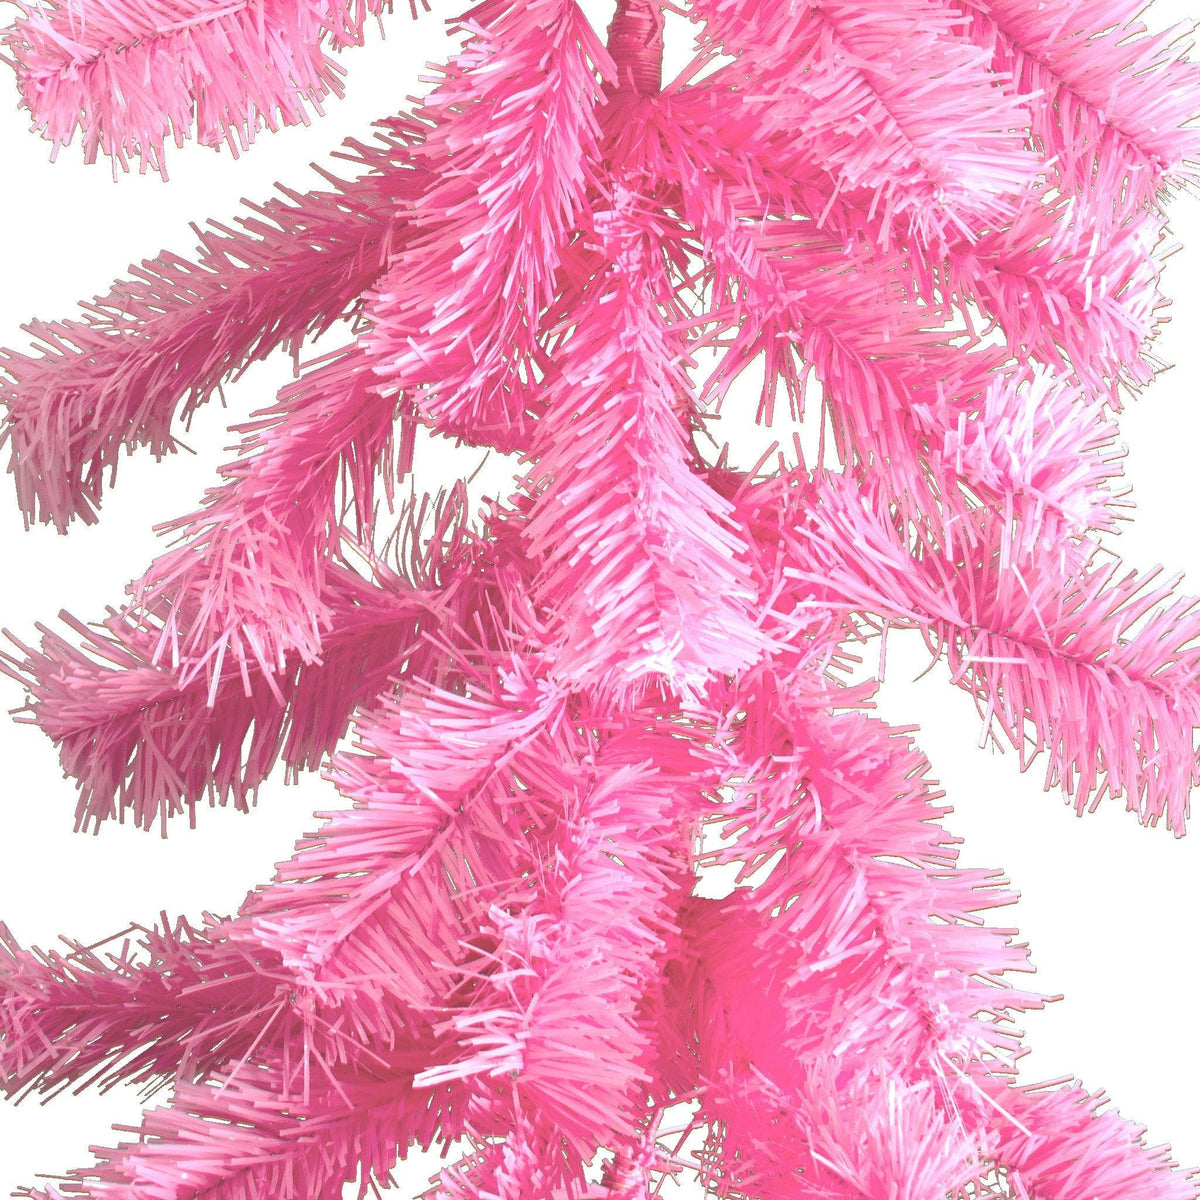 Close up photo of the pink tinsel brush made on the Pink Brush Garlands at Lee Display.